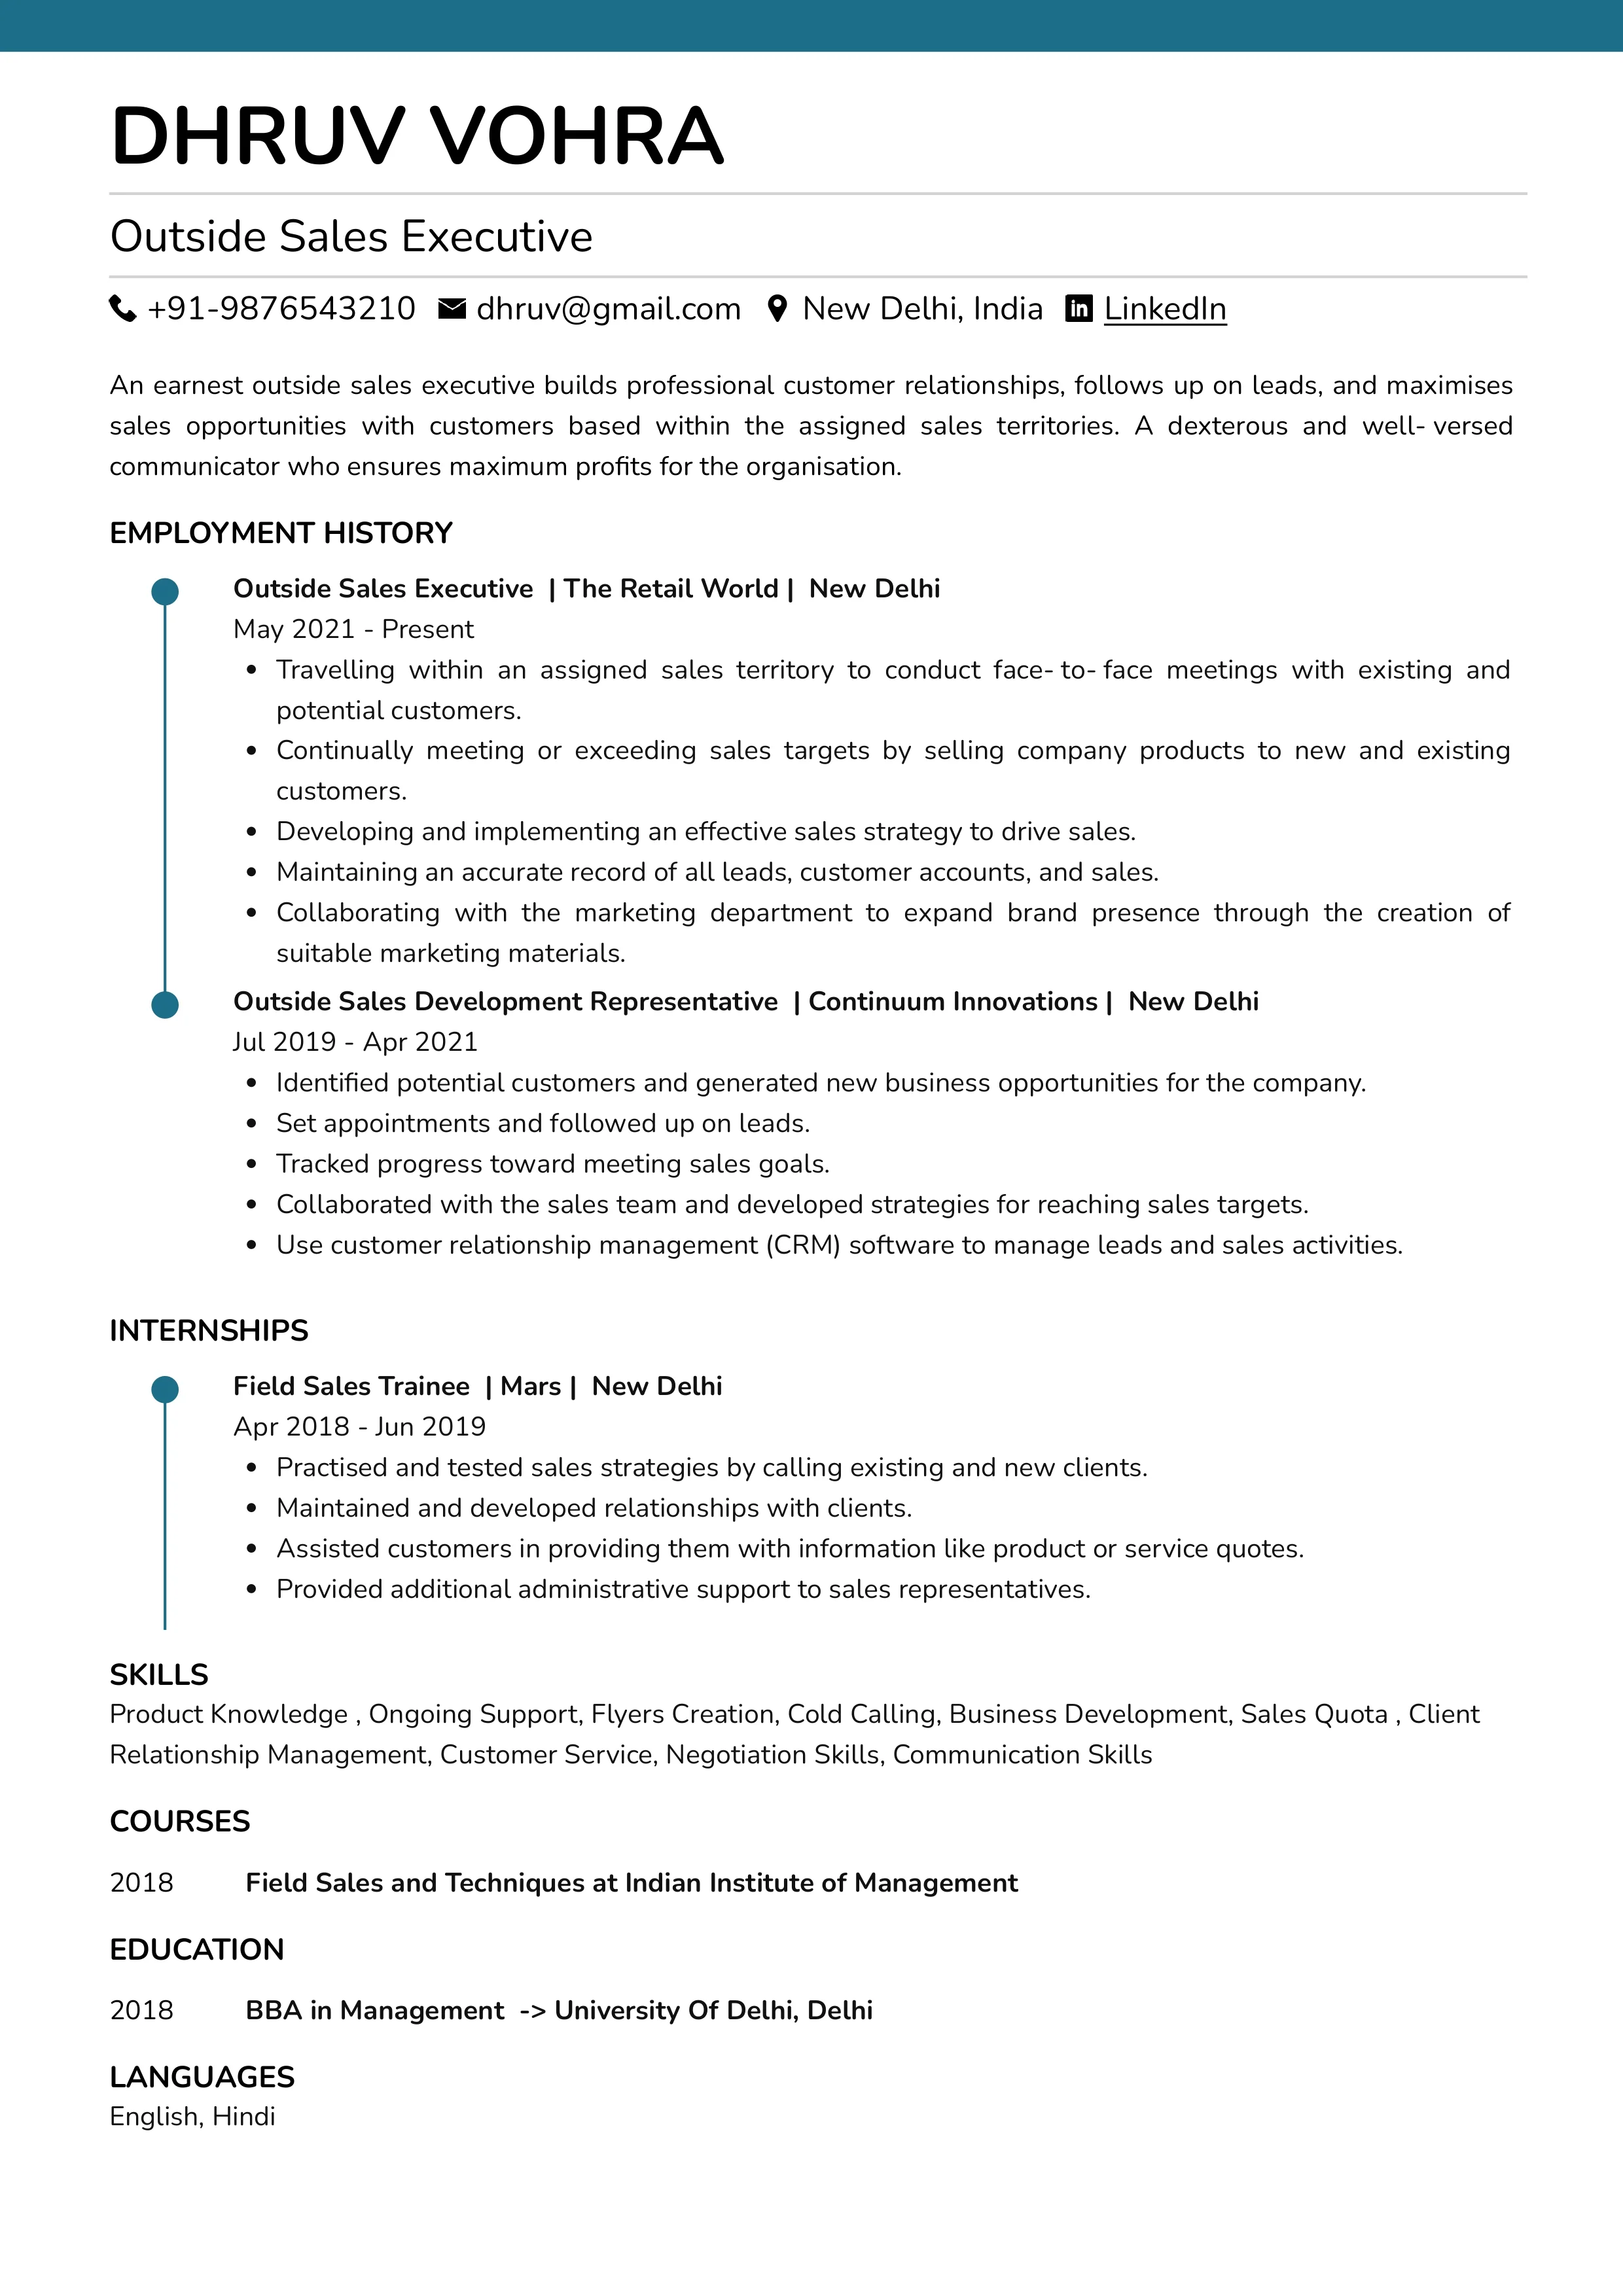 Sample Resume of an Outside Sales Executive | Free Resume Templates & Samples on Resumod.co